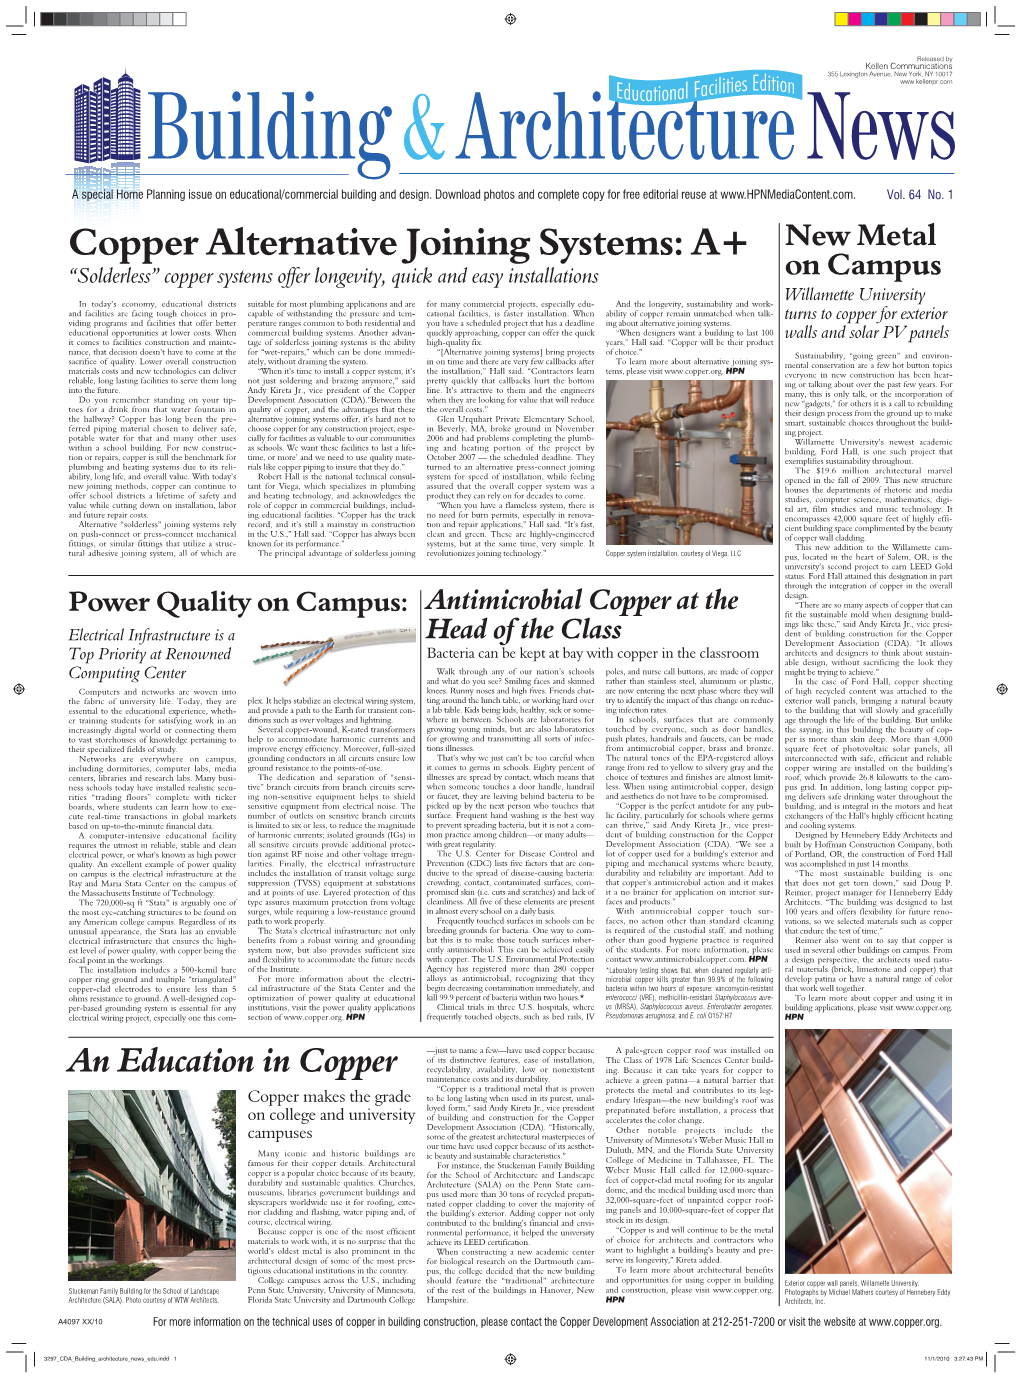 Copper Alternative Joining Systems: A+ New Metal “Solderless” Copper Systems Offer Longevity, Quick and Easy Installations on Campus